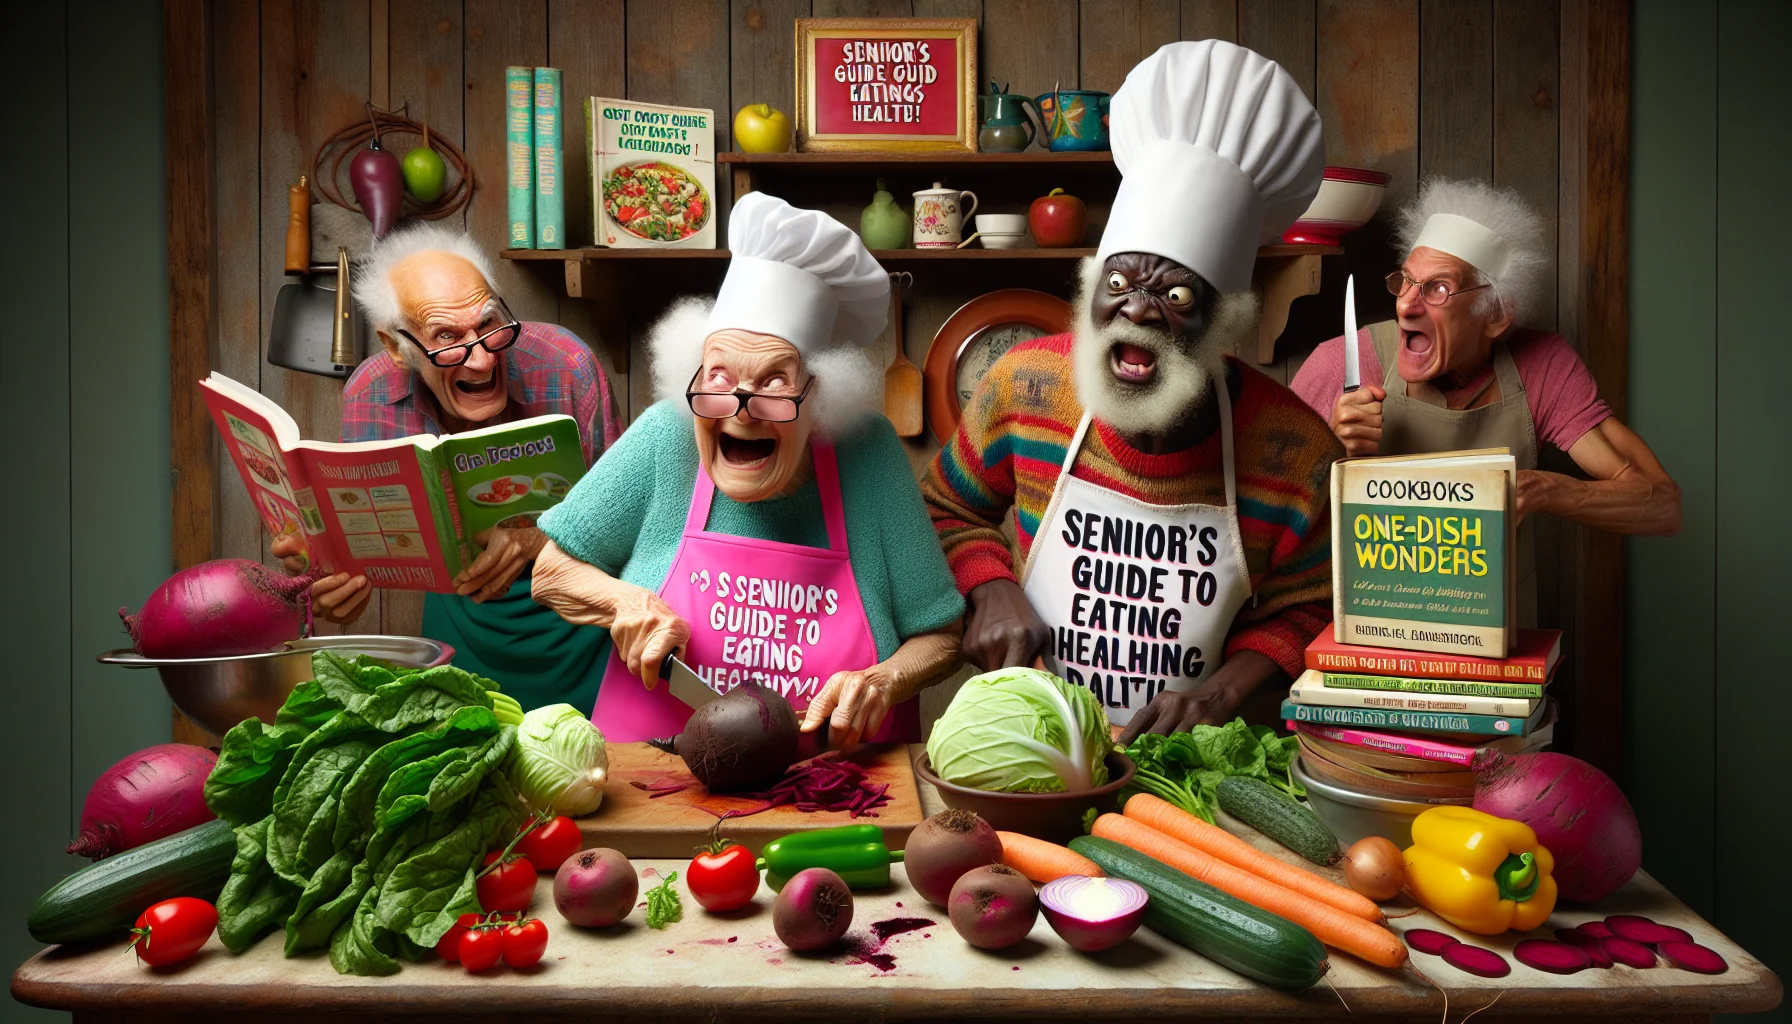 A humorous, realistic scene set in a rustic kitchen. Two elderly people, one Caucasian male and one Black female, are gleefully chopping an overabundance of vegetables. They're sporting humorous clothes: oversized chef hats, neon-colored aprons with funny quotes about diets. In the background, cookbooks titled 'Senior's Guide to Eating Healthy' and 'One-dish Wonders' are stacked clumsily. A third elderly person, a Middle-Eastern male, stares in baffled amusement at a beetroot, unsure of what to do with it. All around, the kitchen is filled with laughter, healthy food and good-natured teasing.